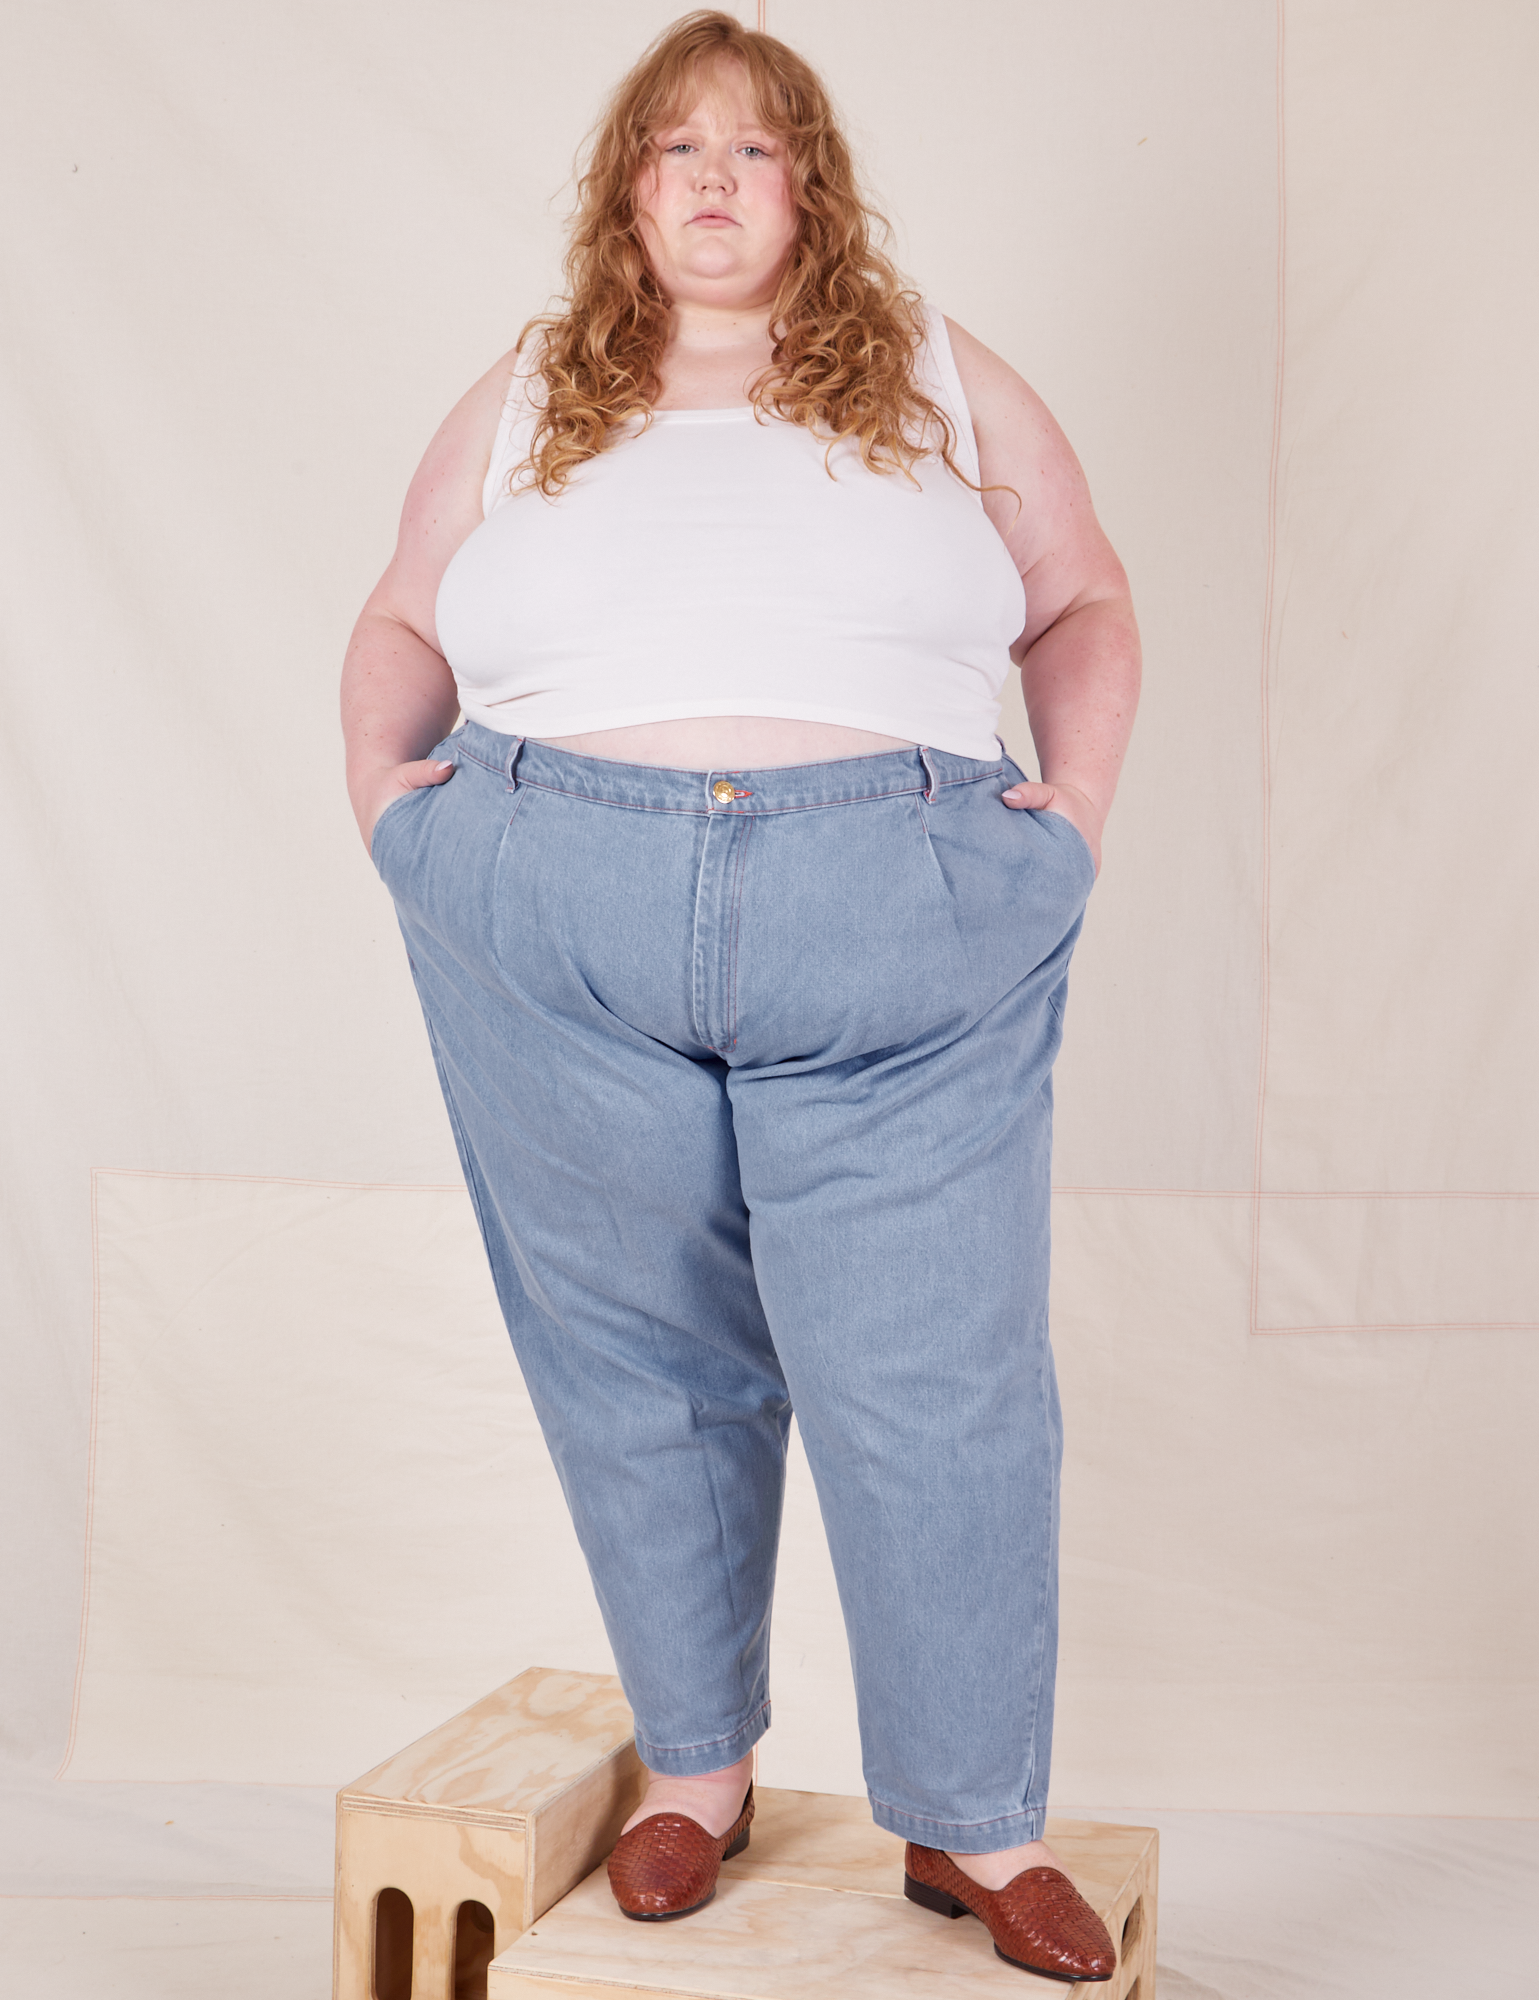 Catie is wearing Denim Trouser Jeans in Light Wash and Cropped Tank Top in vintage tee off-white